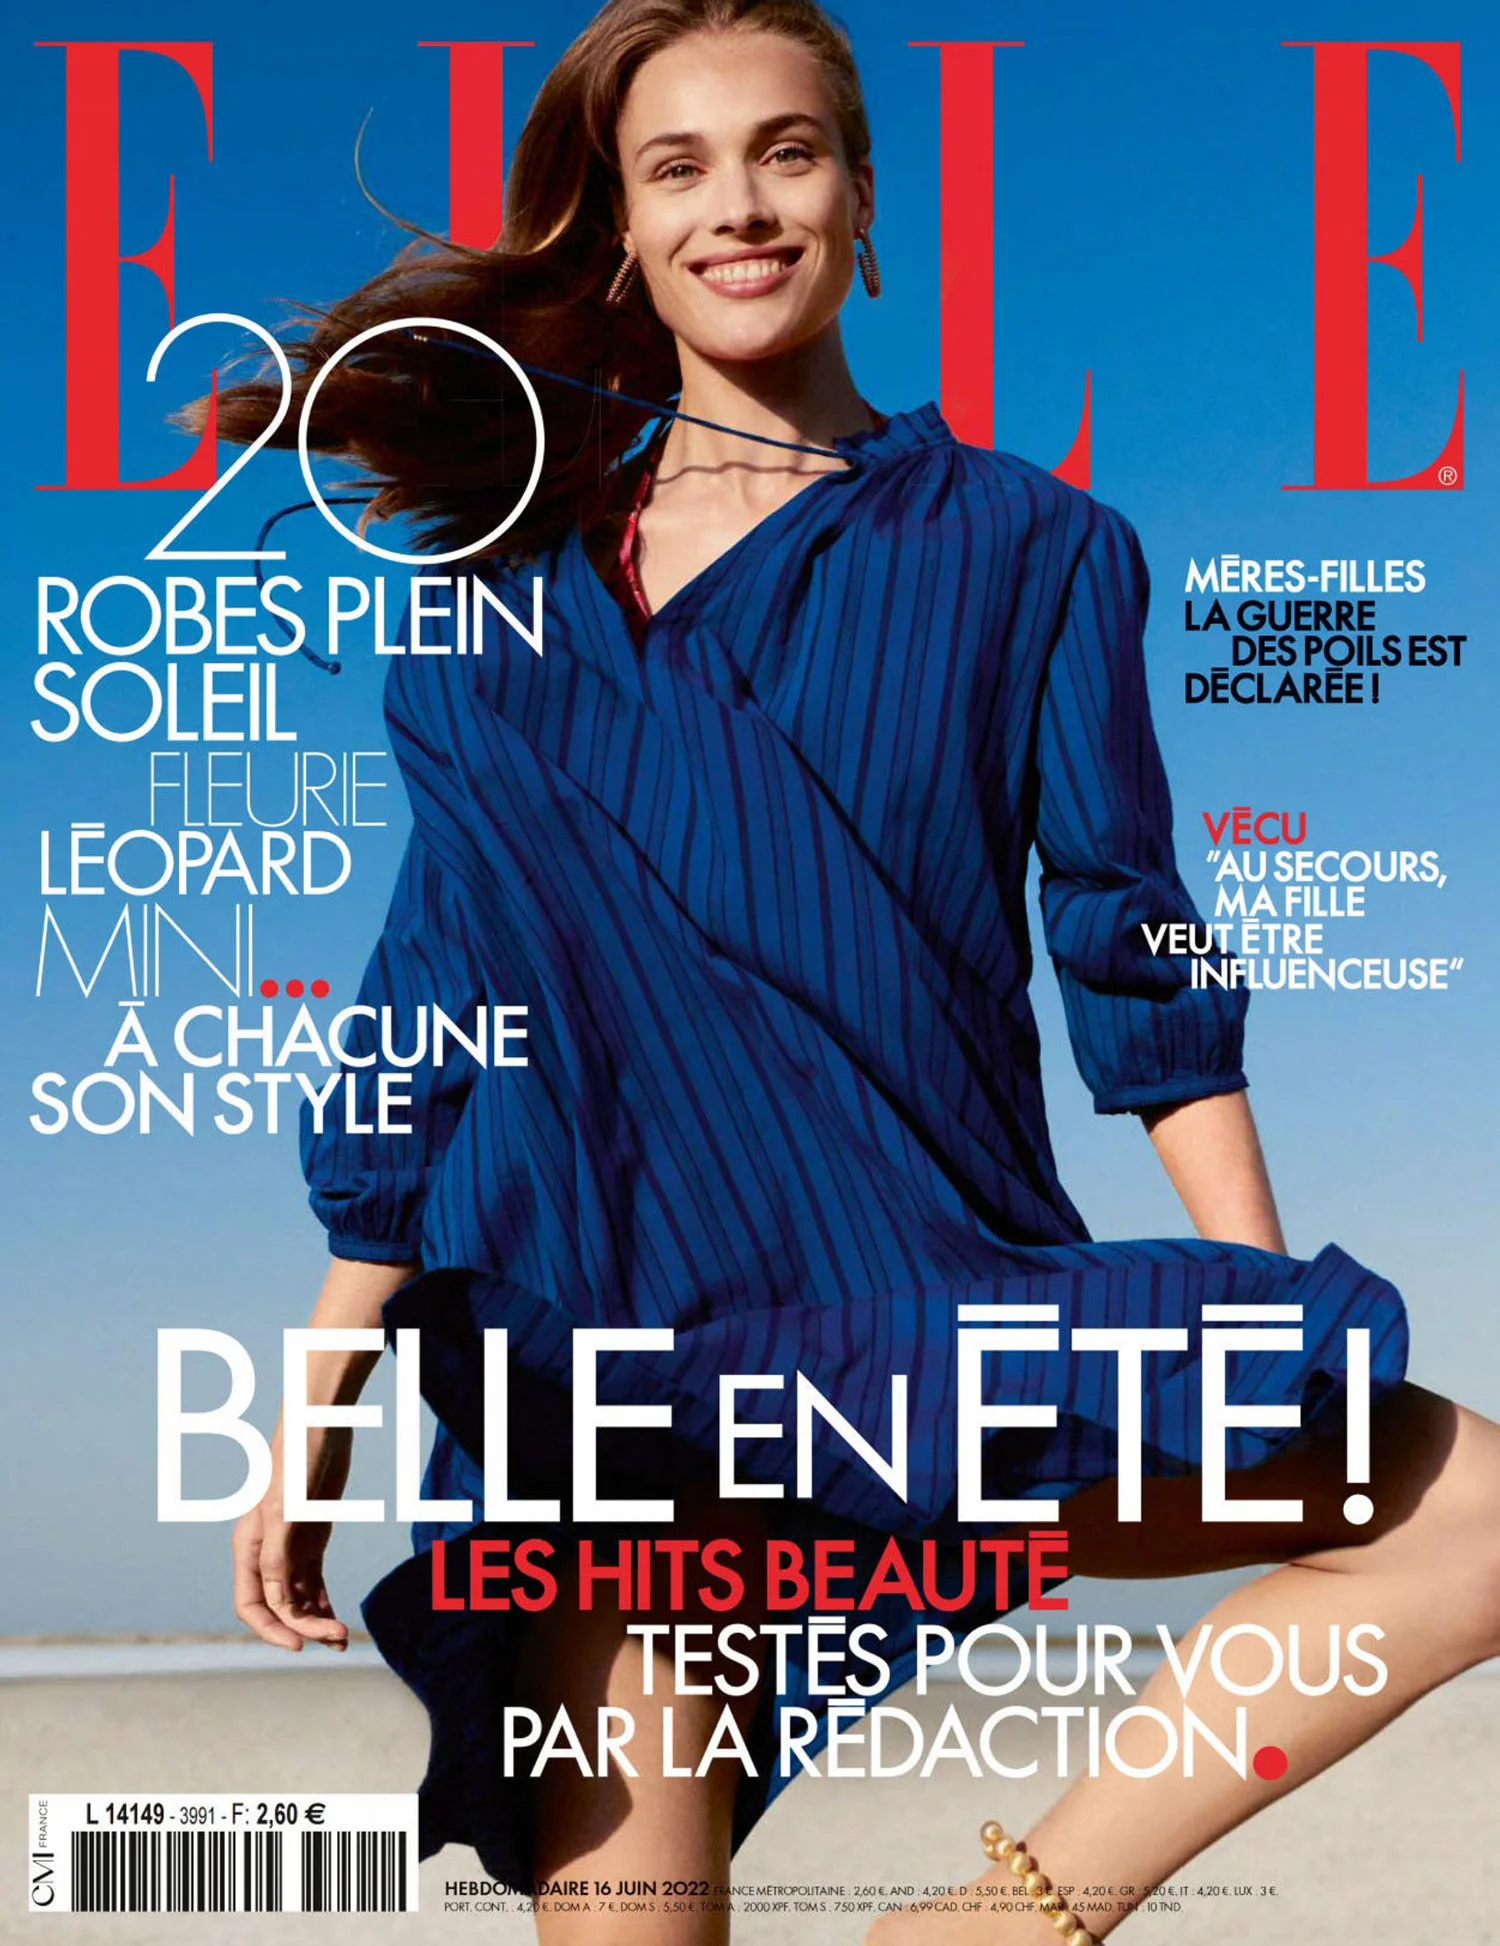 Rozanne Verduin covers Elle France June 16th, 2022 by Jan Welters